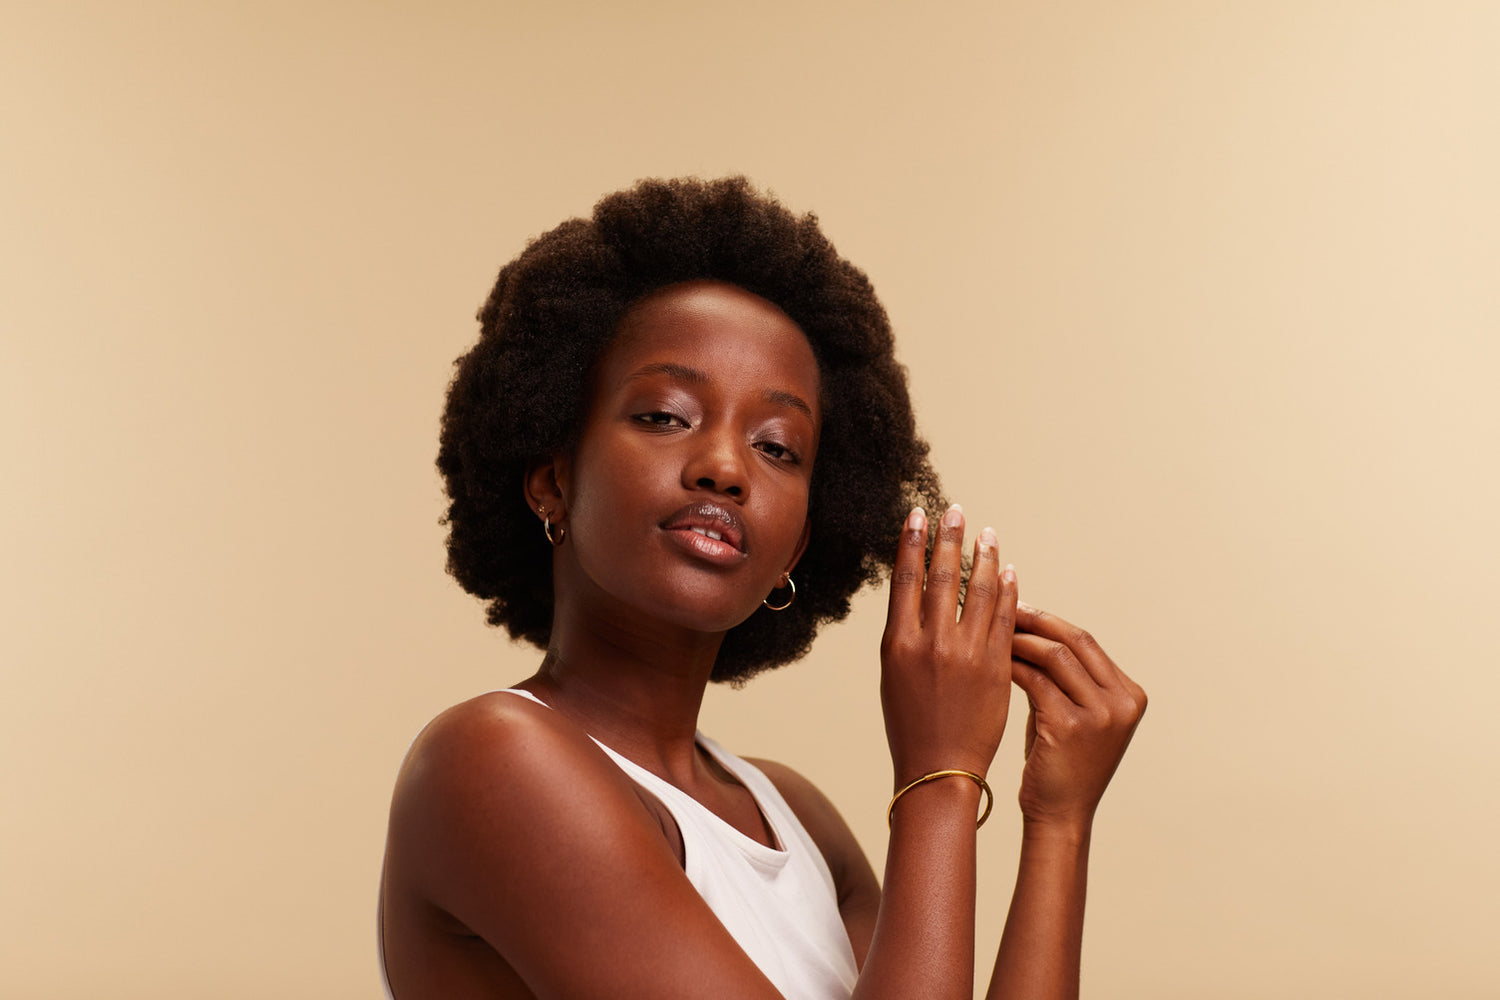 5-step hair care routine for curly, coily and Afro hair